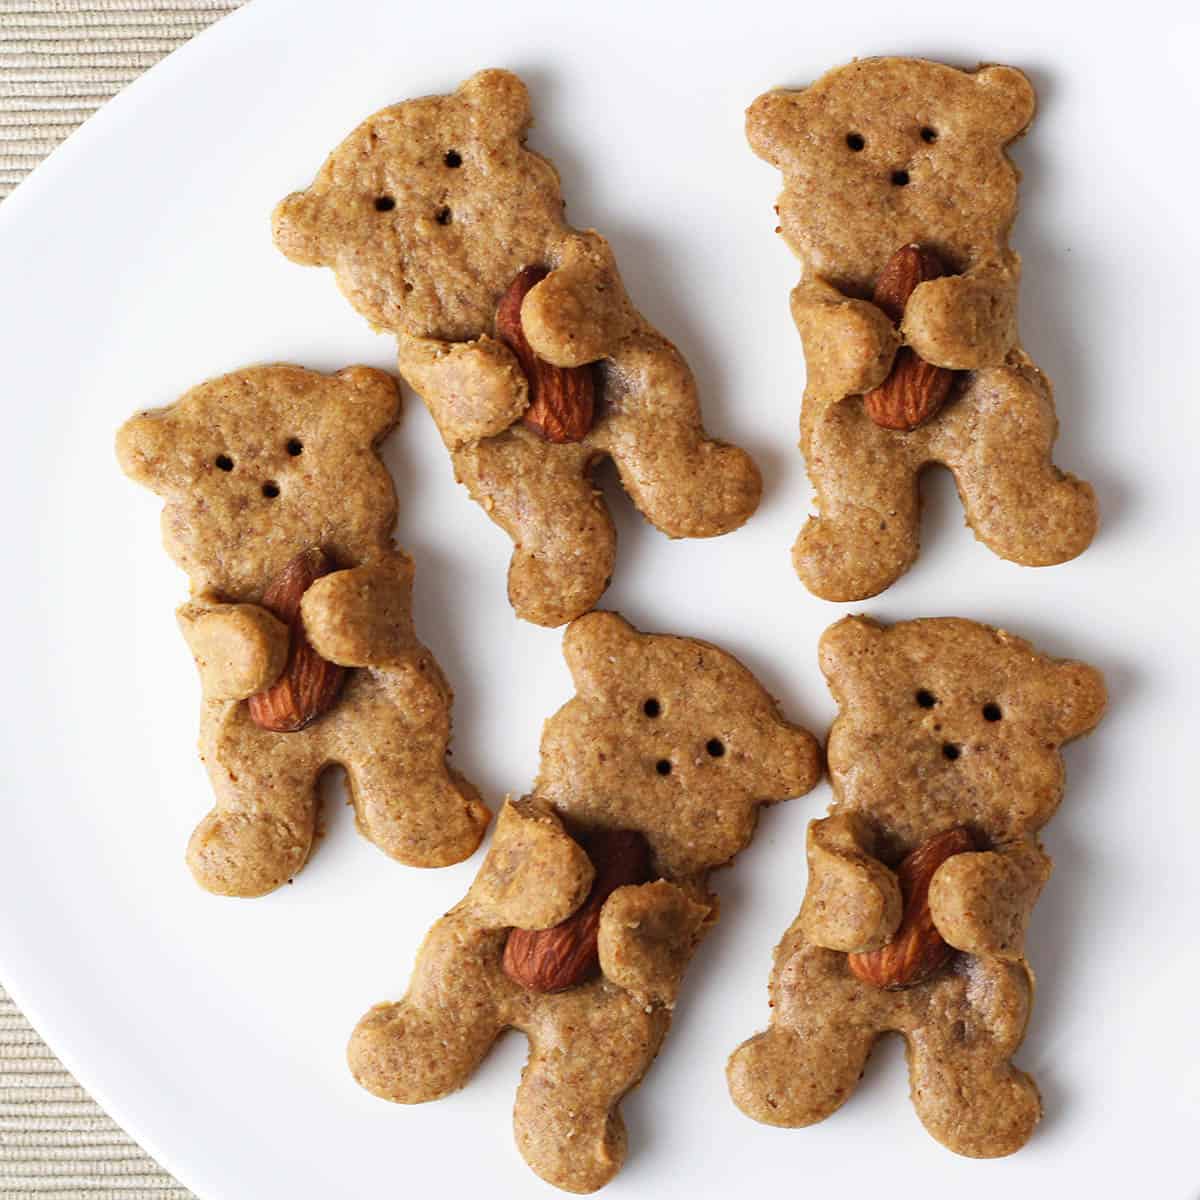 five small light brown bear shaped cookies that seem to be hugging almonds that are baked into them, on a white plate